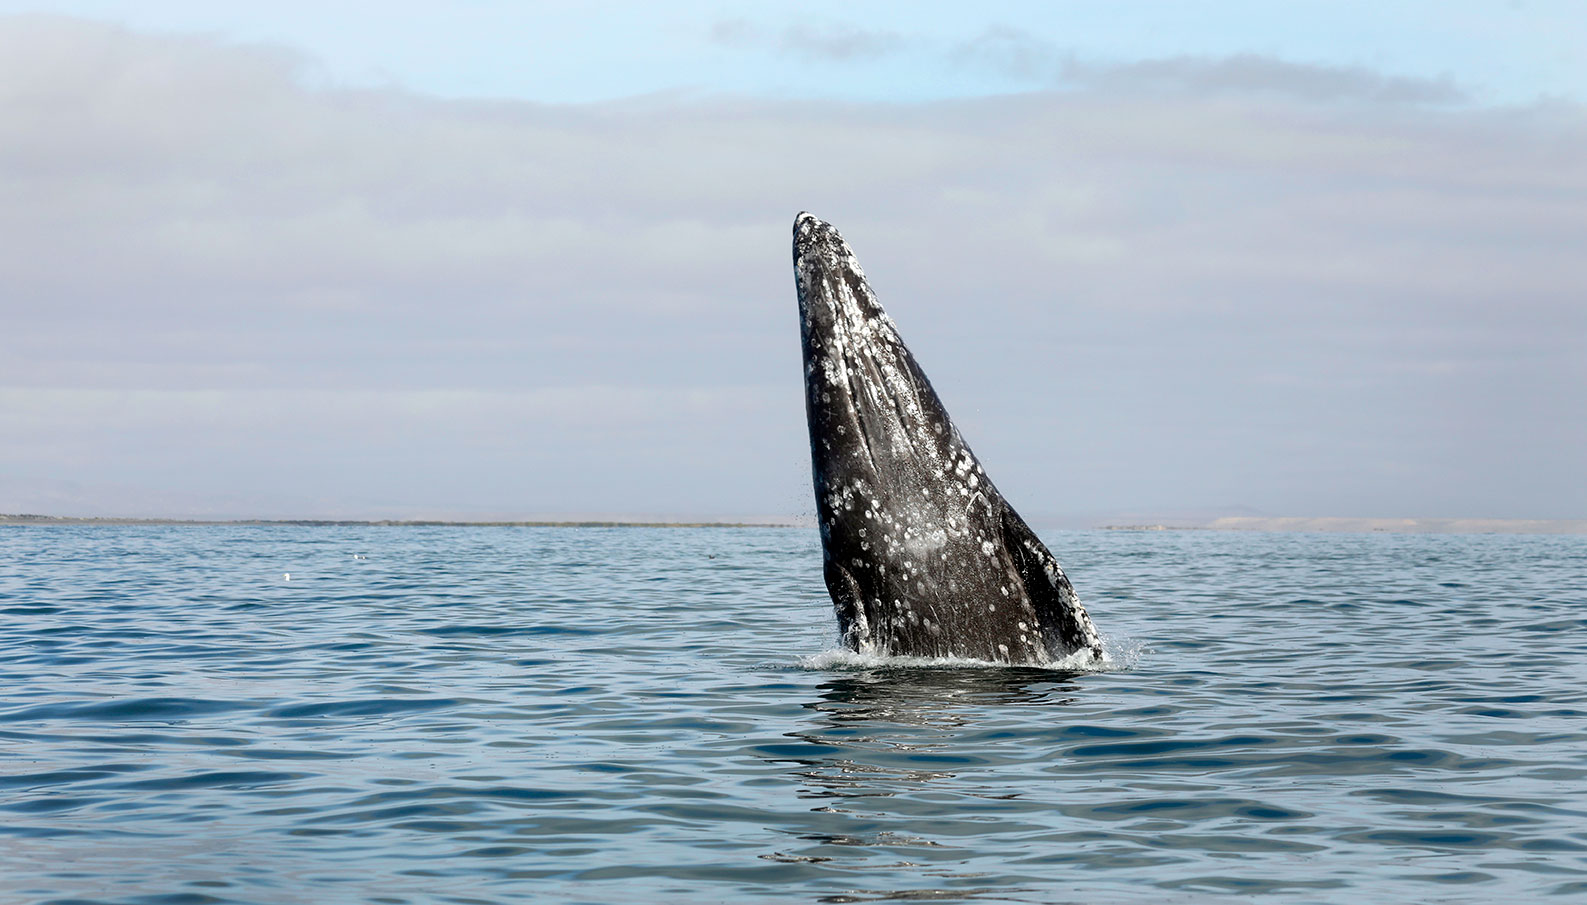 "Spy hopping" is a behavior exhibited by cetaceans, such as the gray whale above, and some sharks.